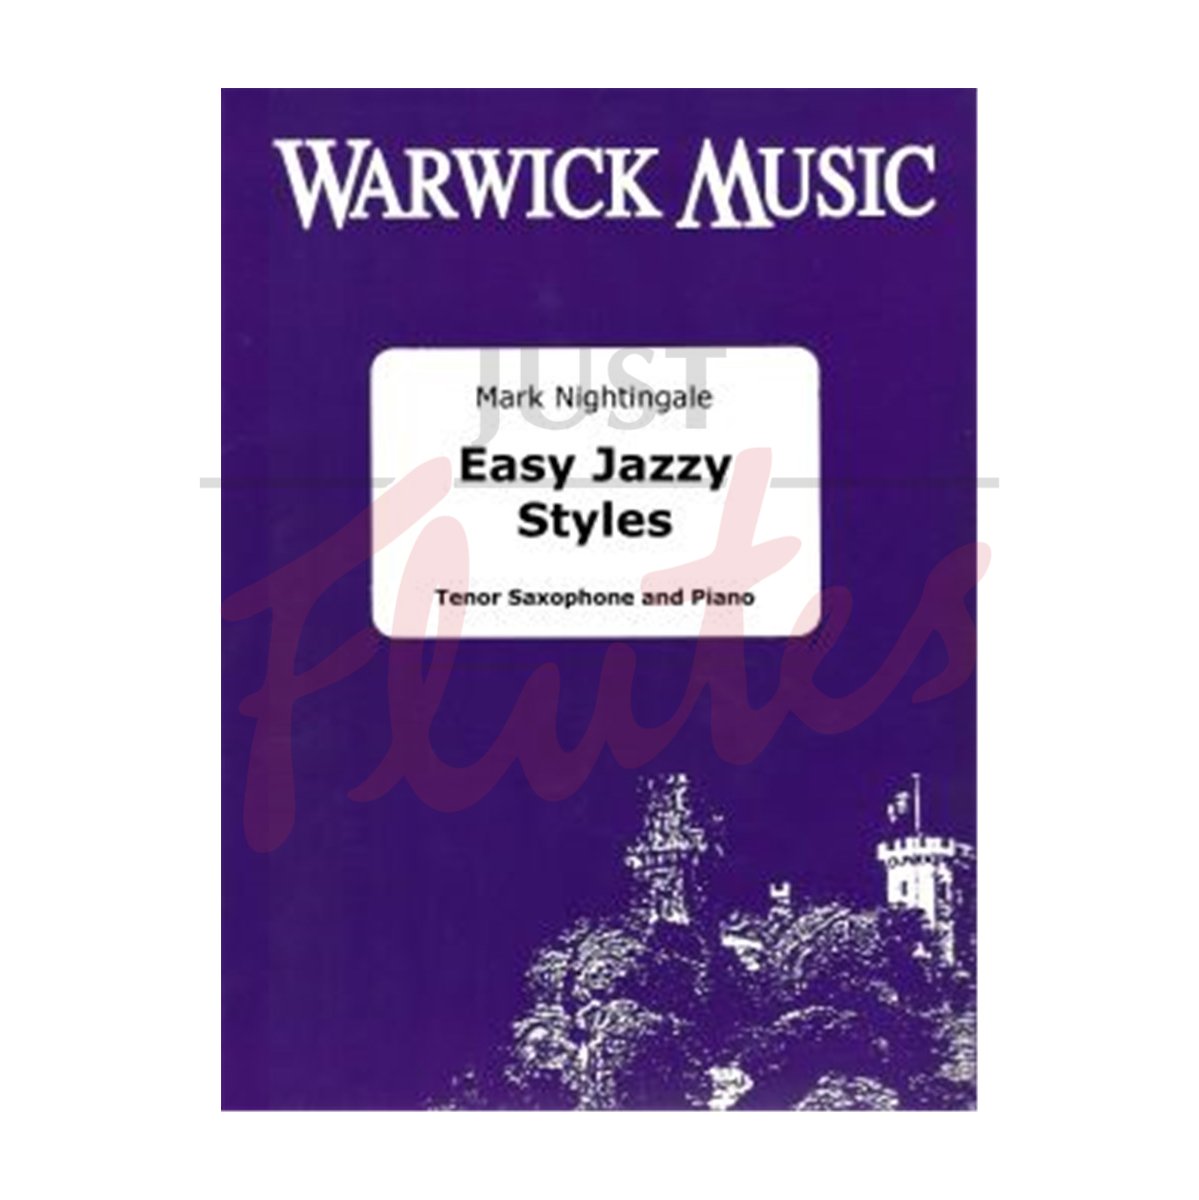 Easy Jazzy Styles for Tenor Saxophone and Piano